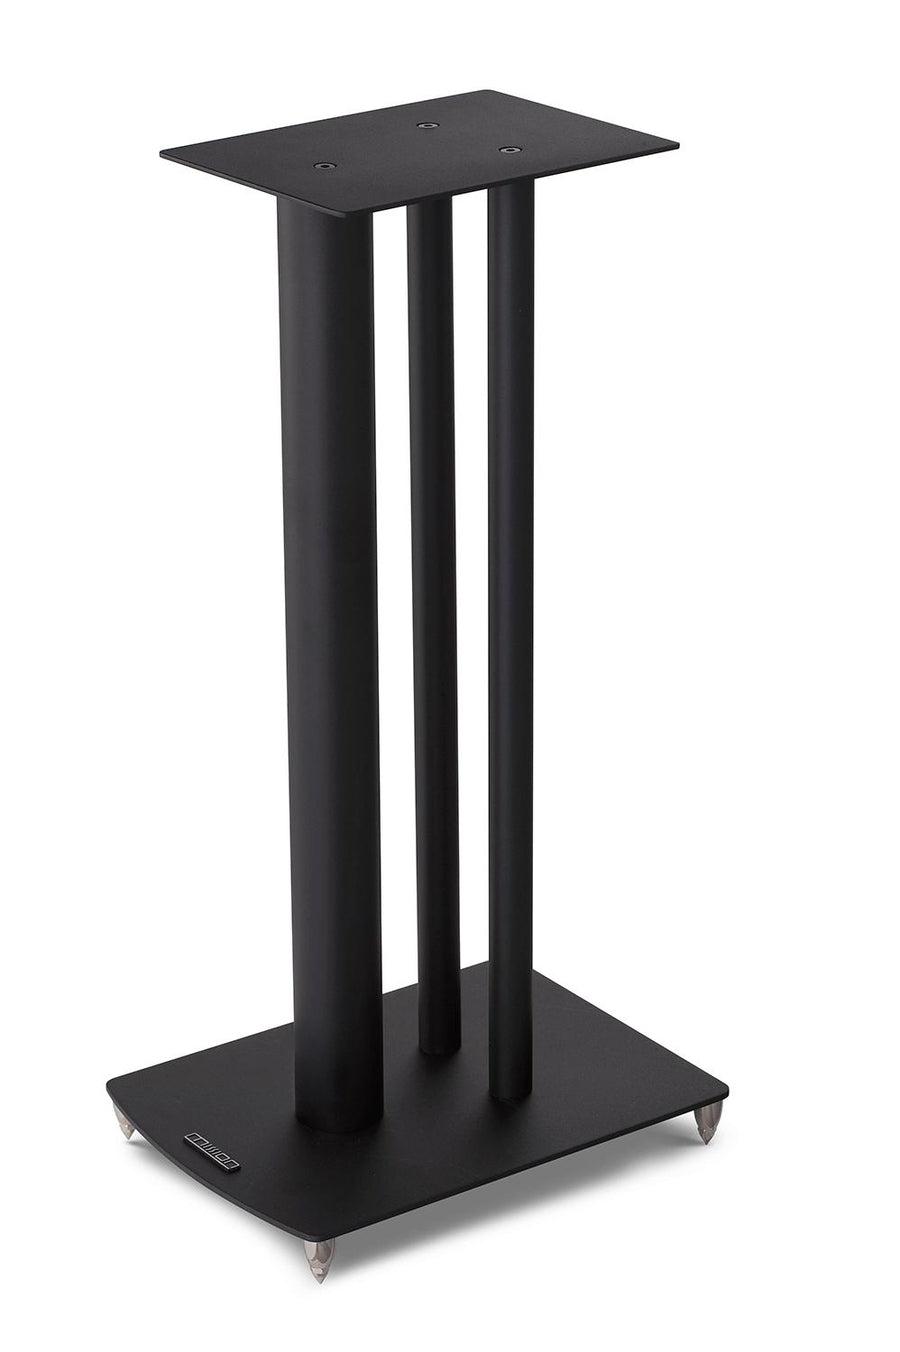 Mission Stancette Speaker Stands (Pair)-Black- at Audio Influence